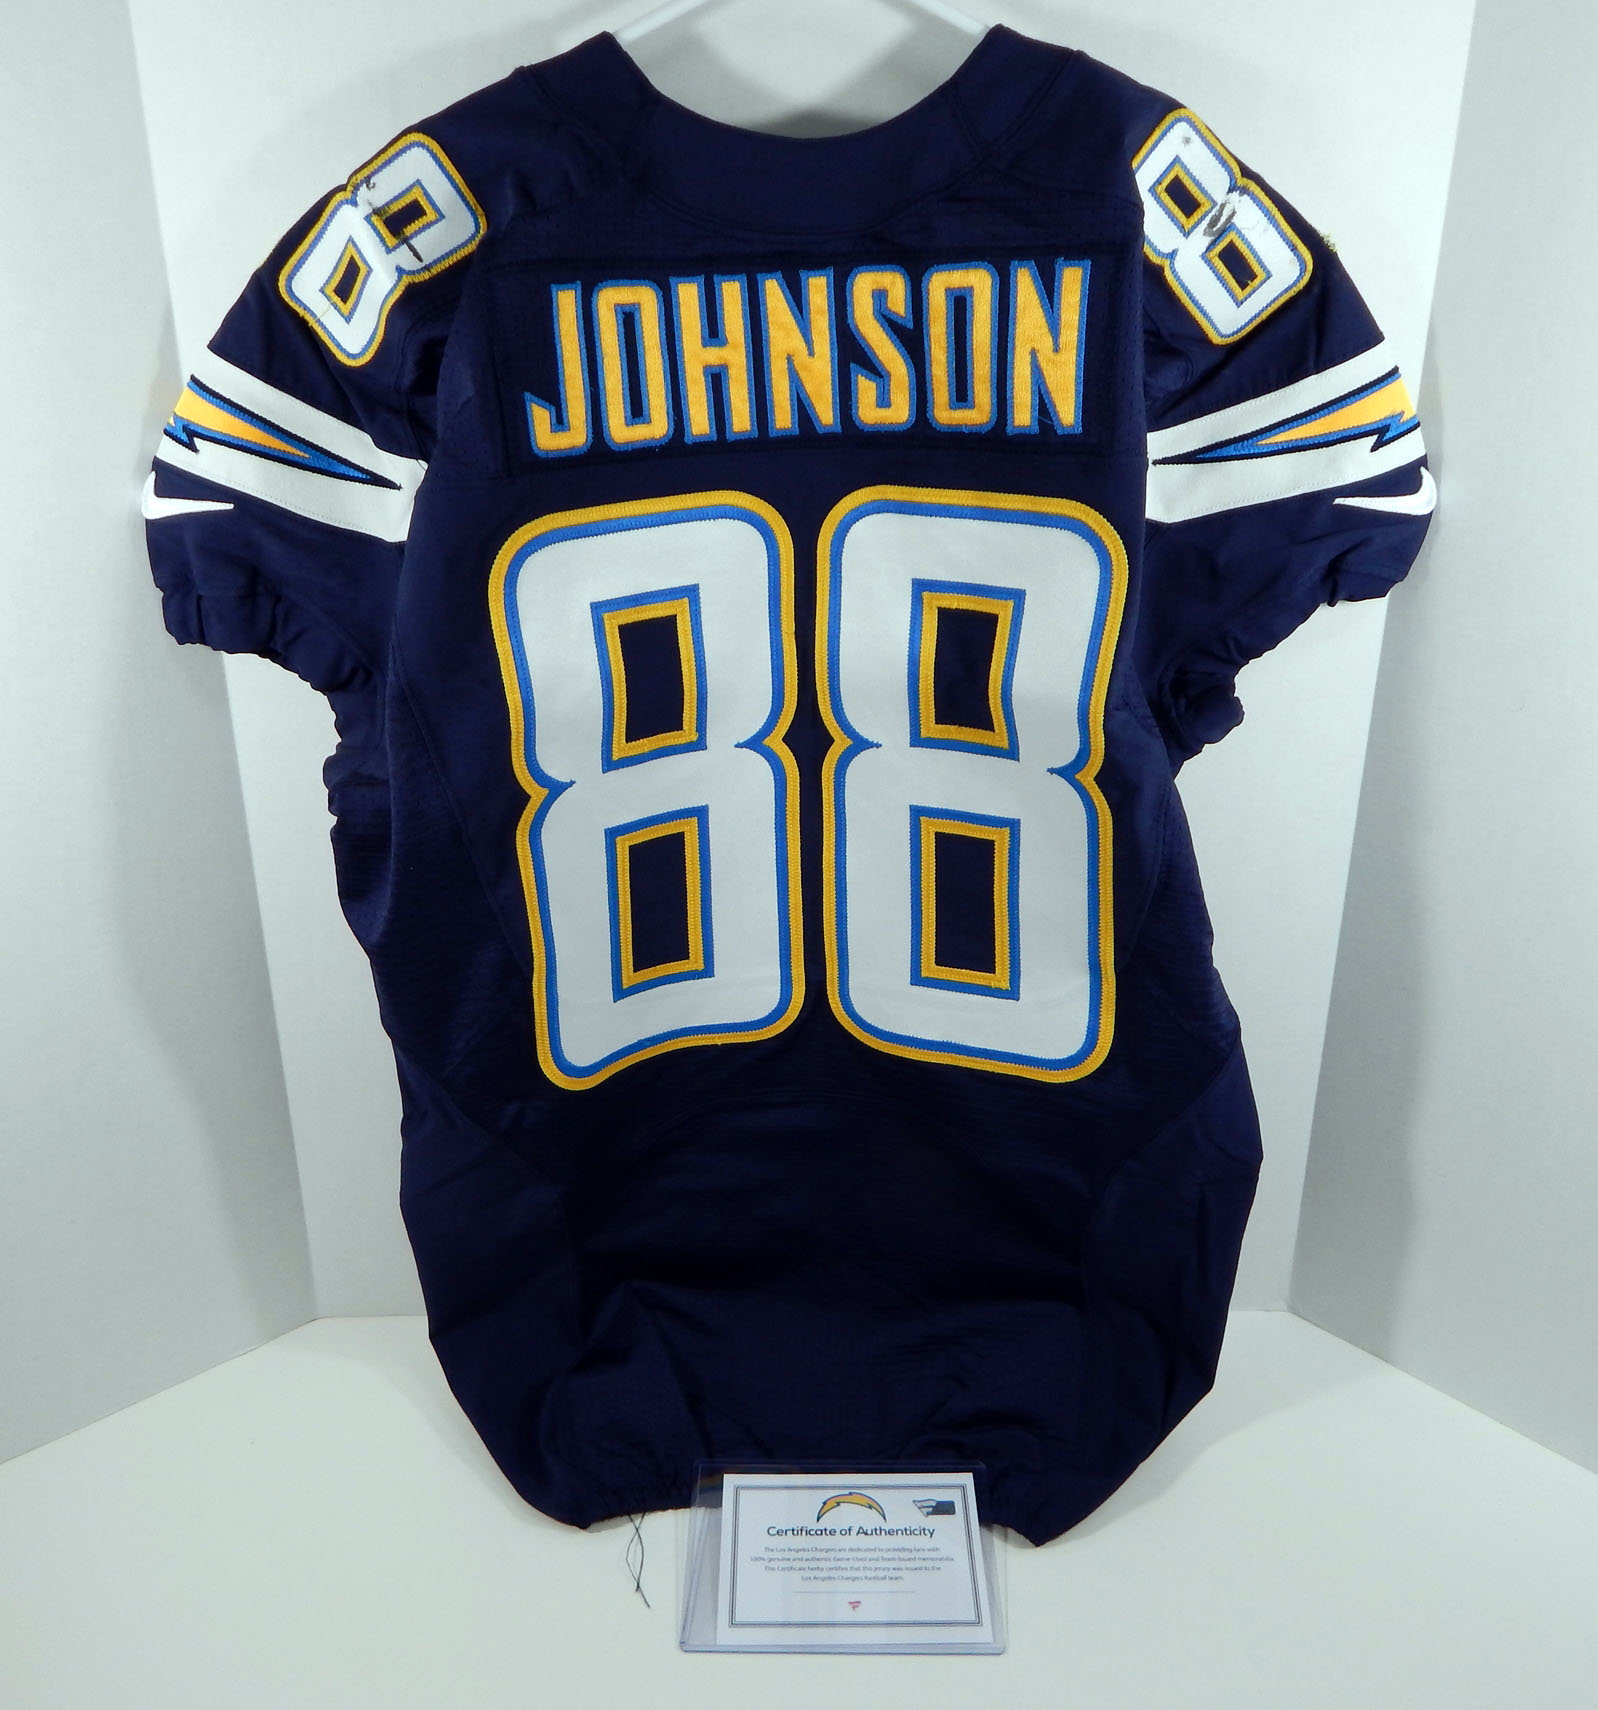 2015 chargers jersey